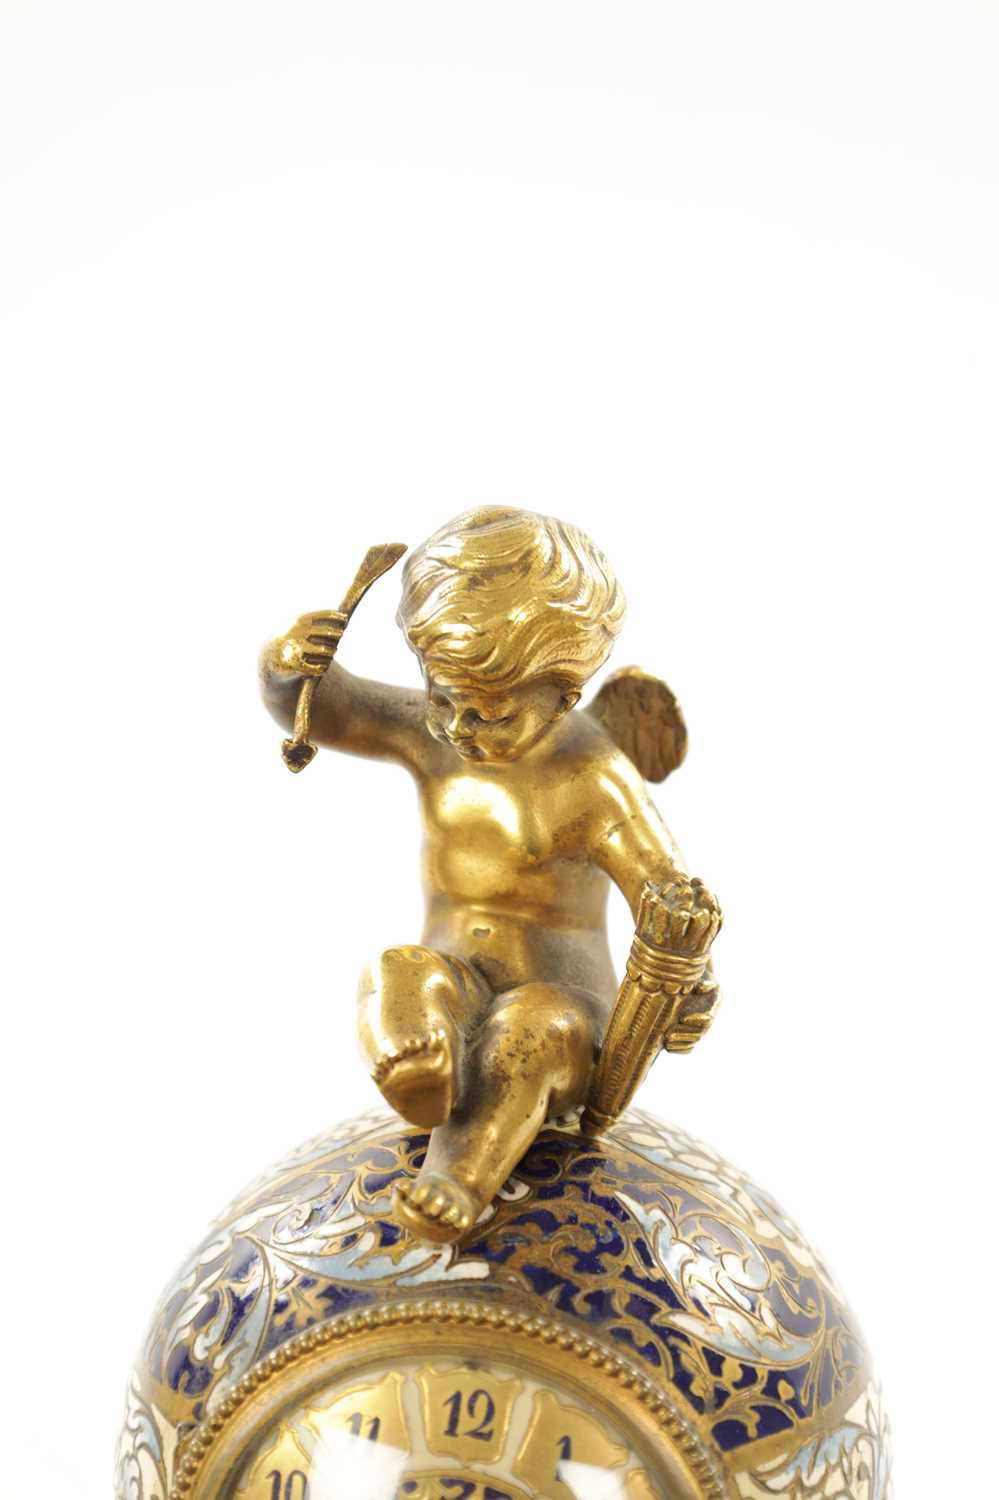 A LATE 19TH CENTURY FRENCH ORMOLU CHAMPLEVE ENAMEL MANTEL CLOCK - Image 3 of 8